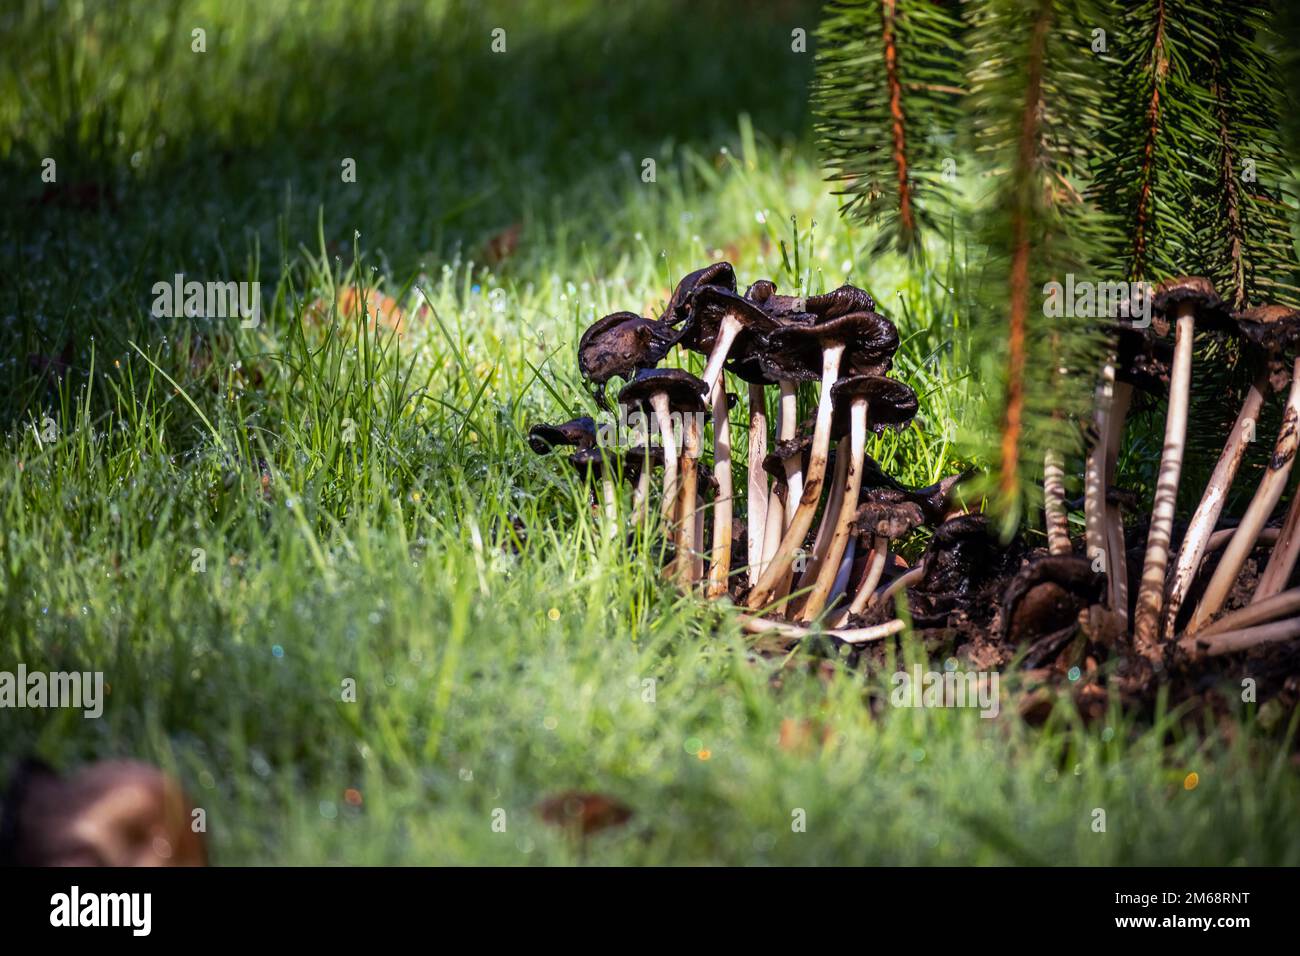 Psilocybin magic mushrooms growing in forest. Naturally psychoactive and hallucinogenic compound concept. Stock Photo